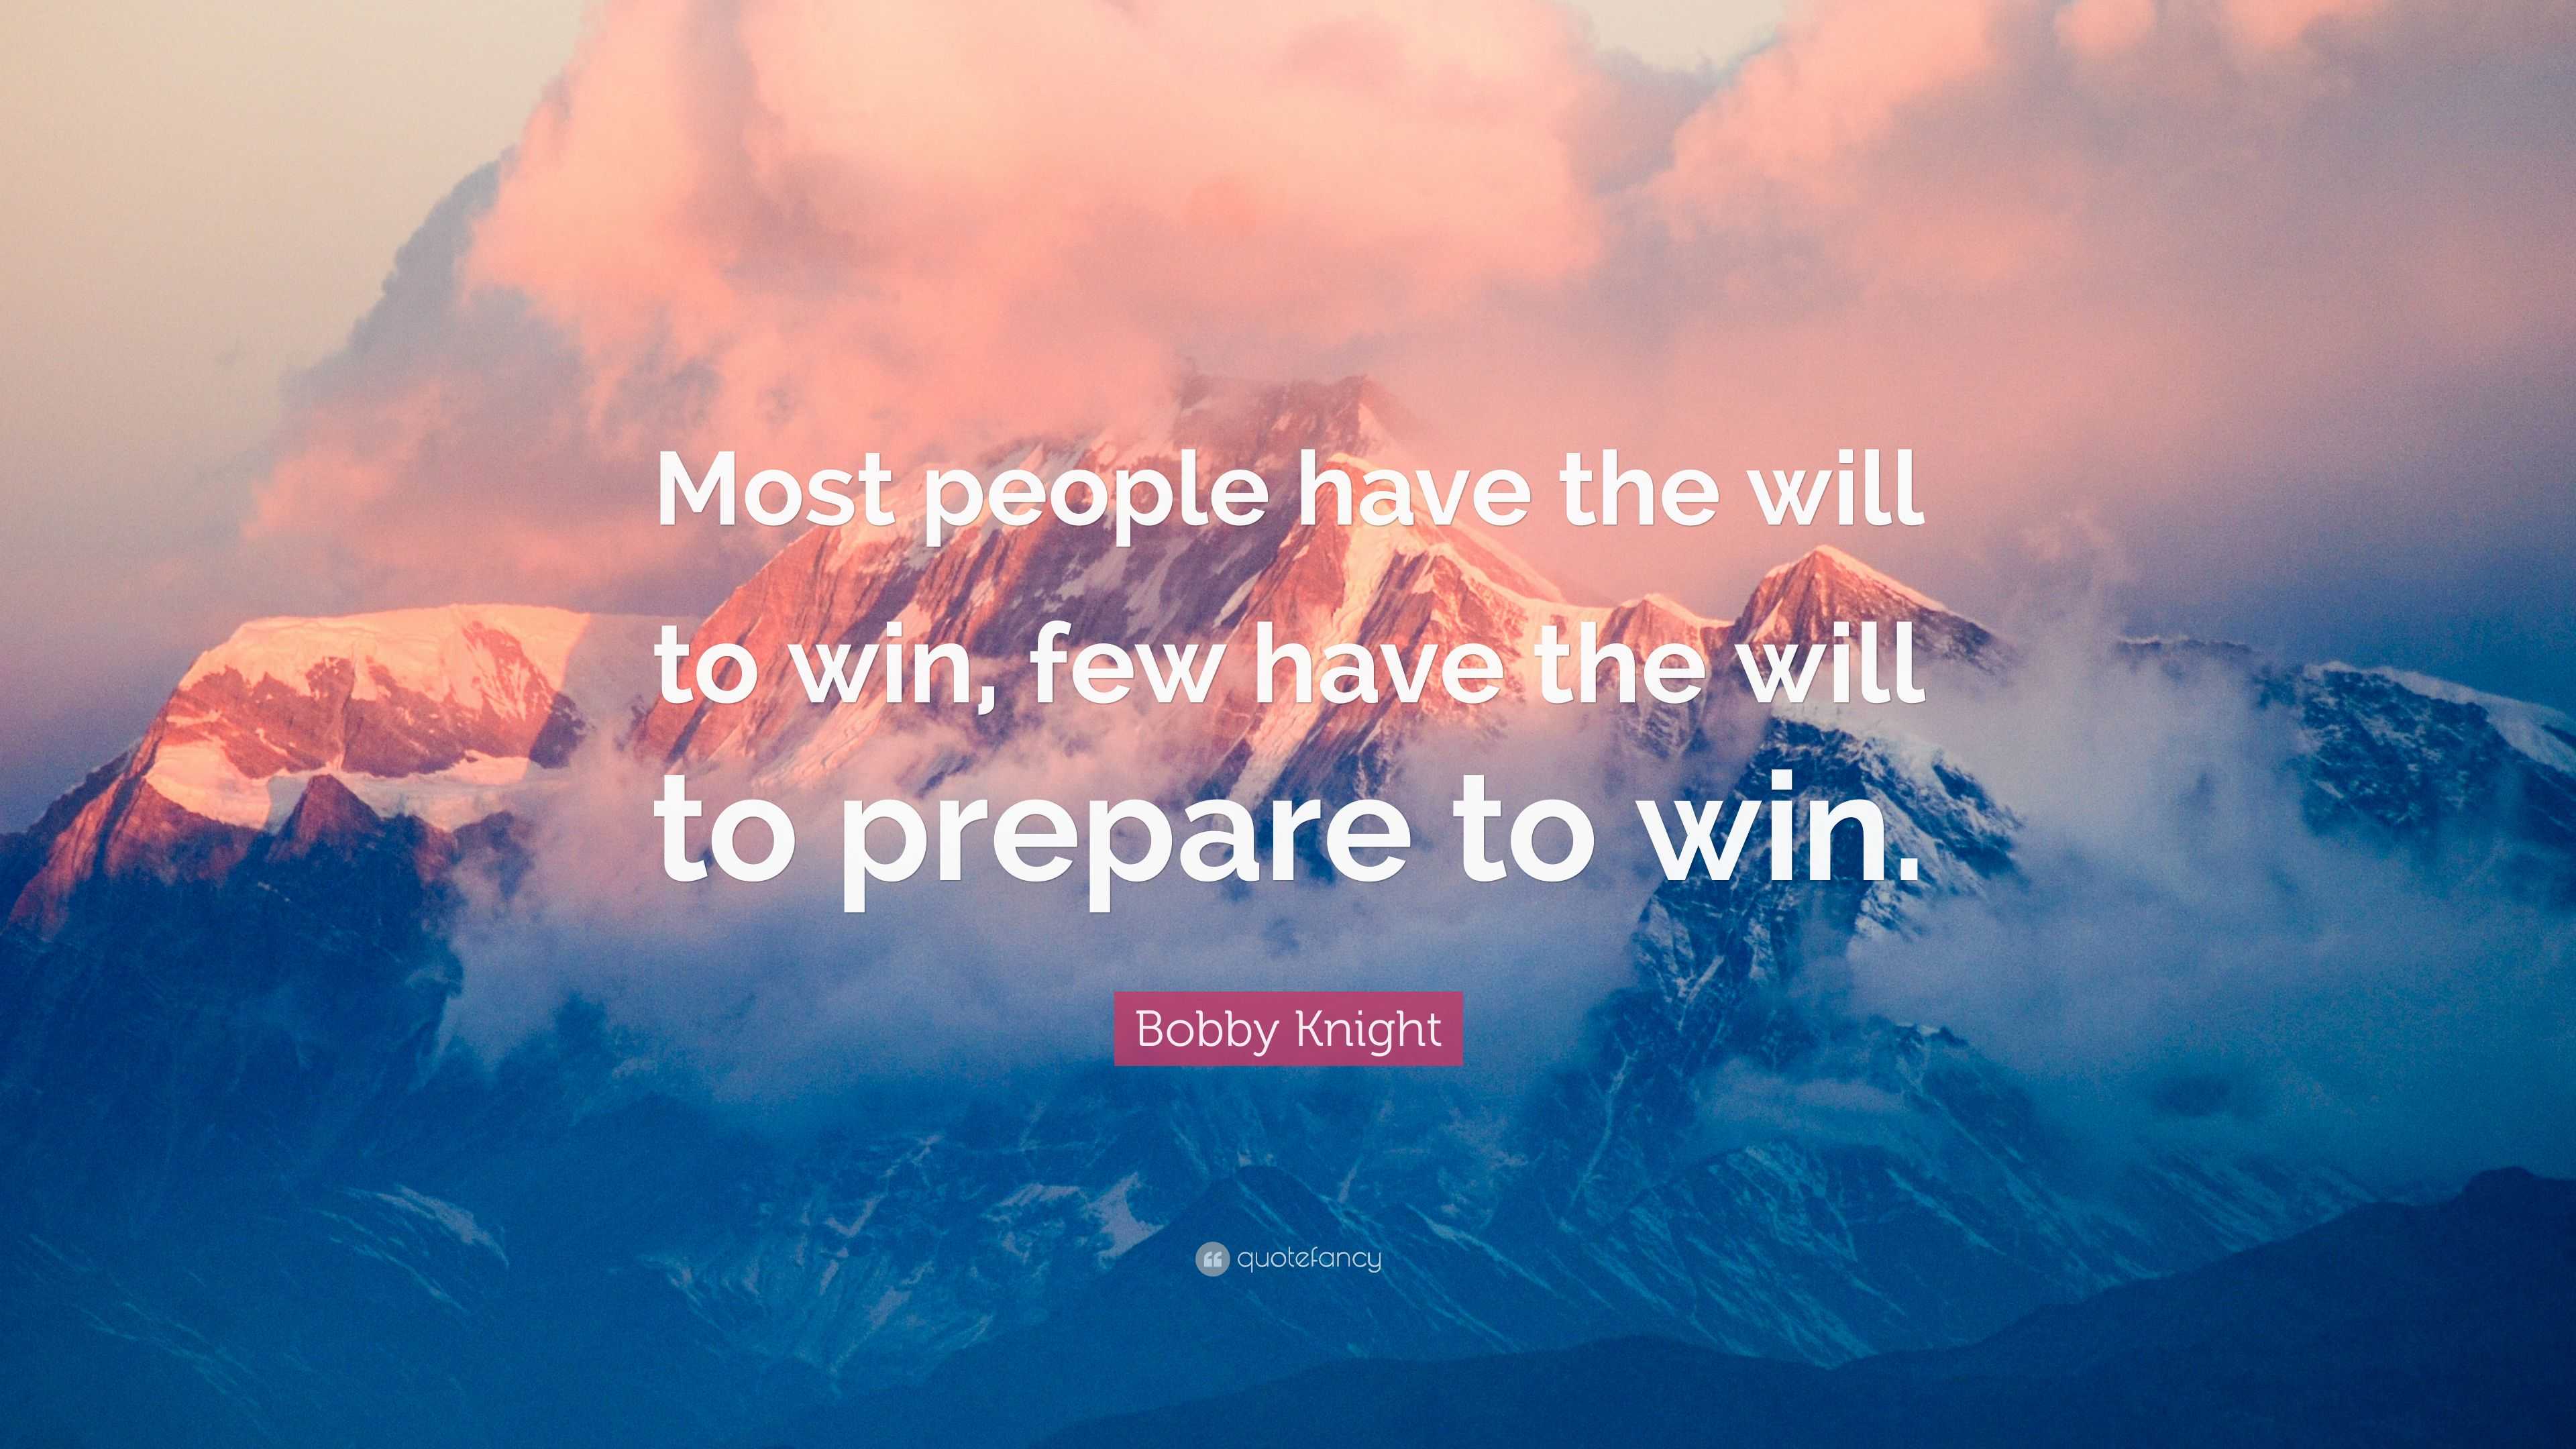 Bobby Knight Quote: “Most people have the will to win, few have the ...